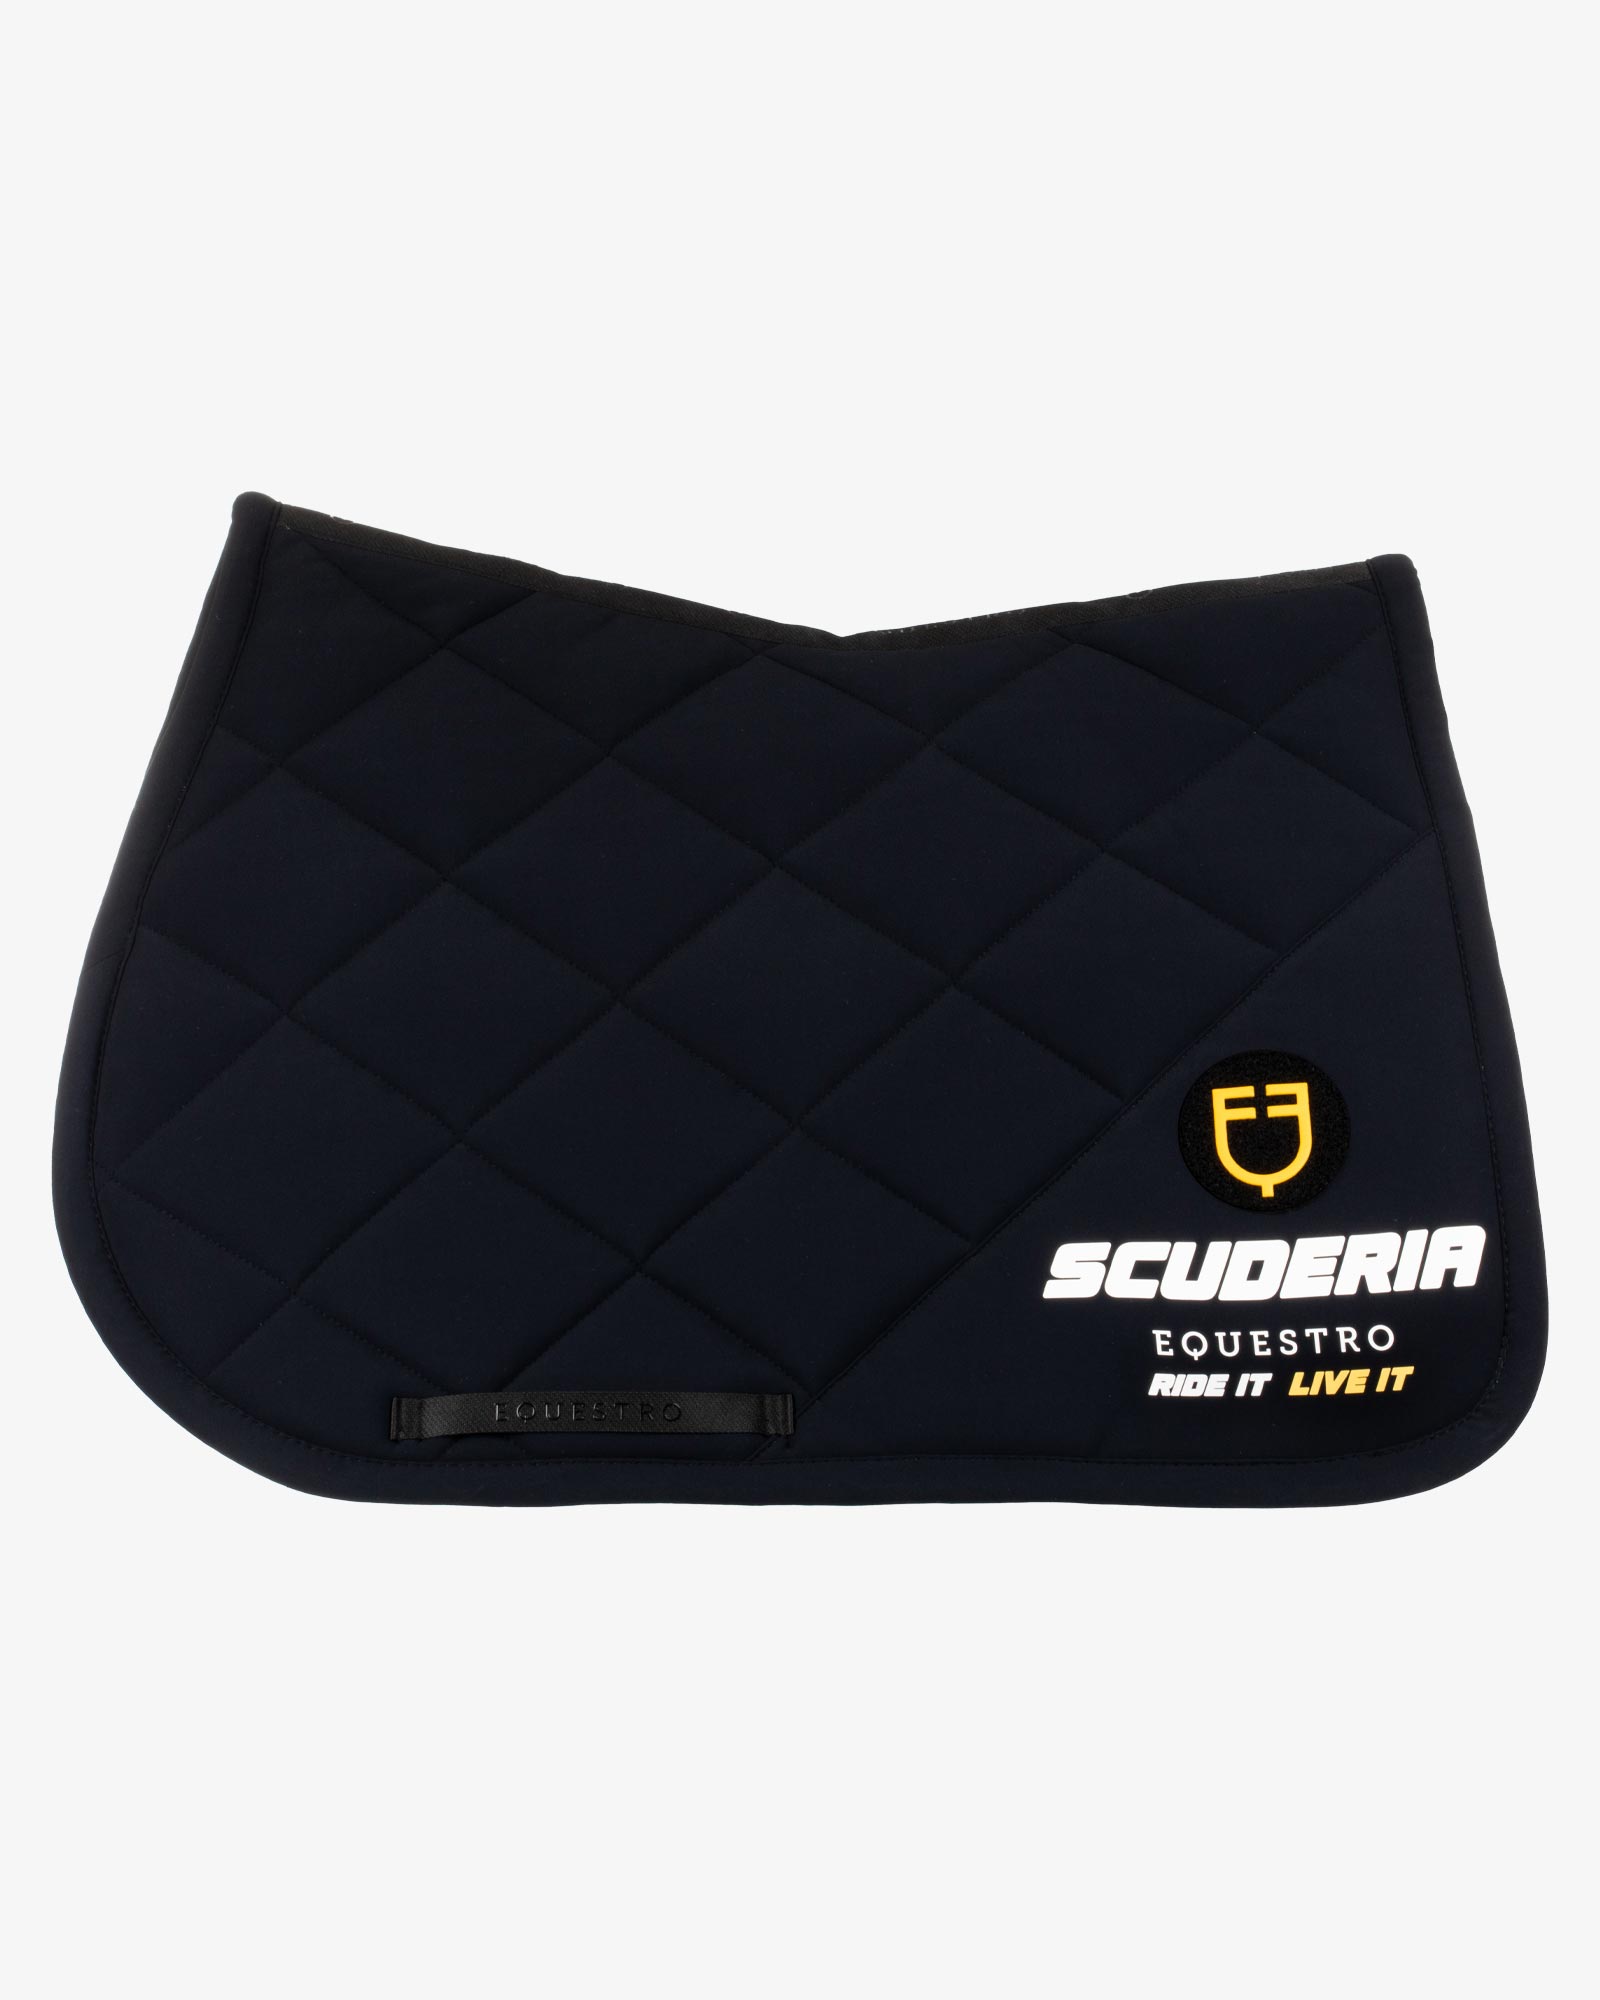 Velcro patch jumping saddle pad | Shop | Equestro